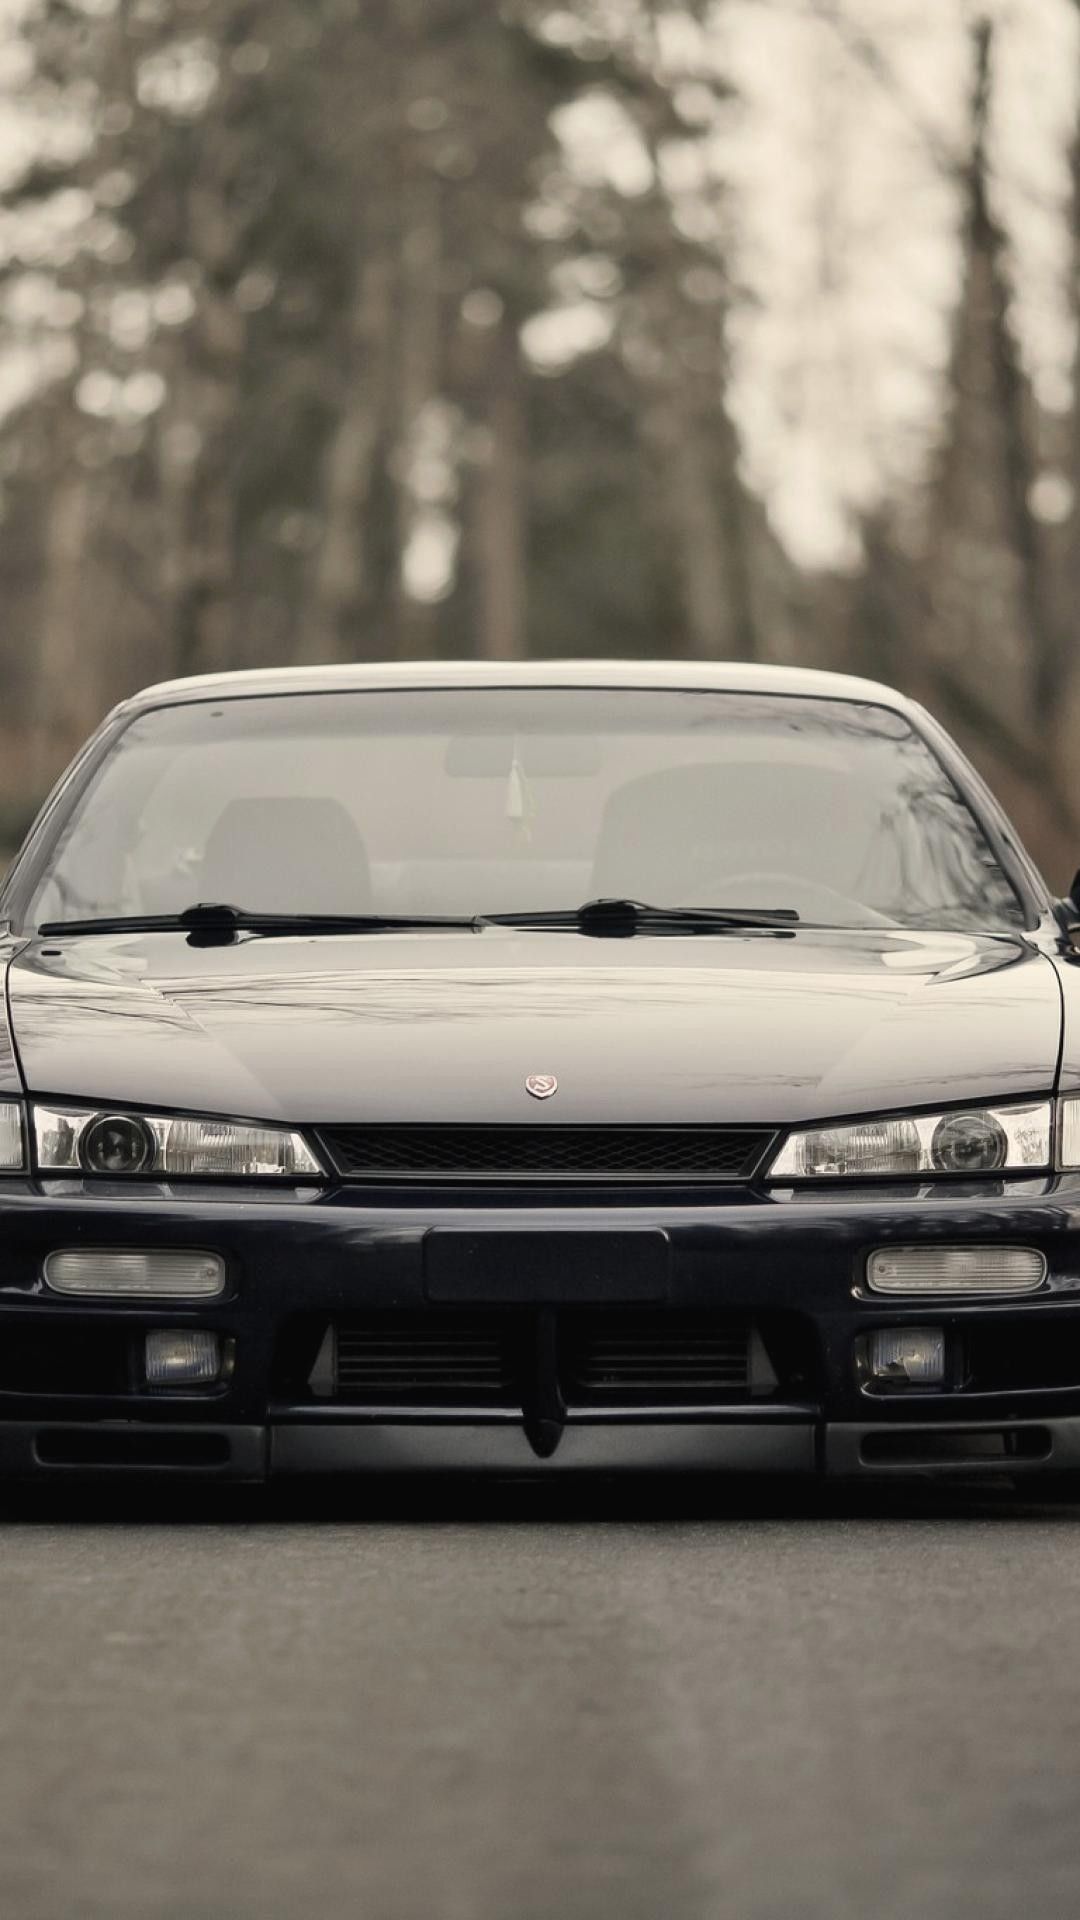 Jdm Photos Download The BEST Free Jdm Stock Photos  HD Images